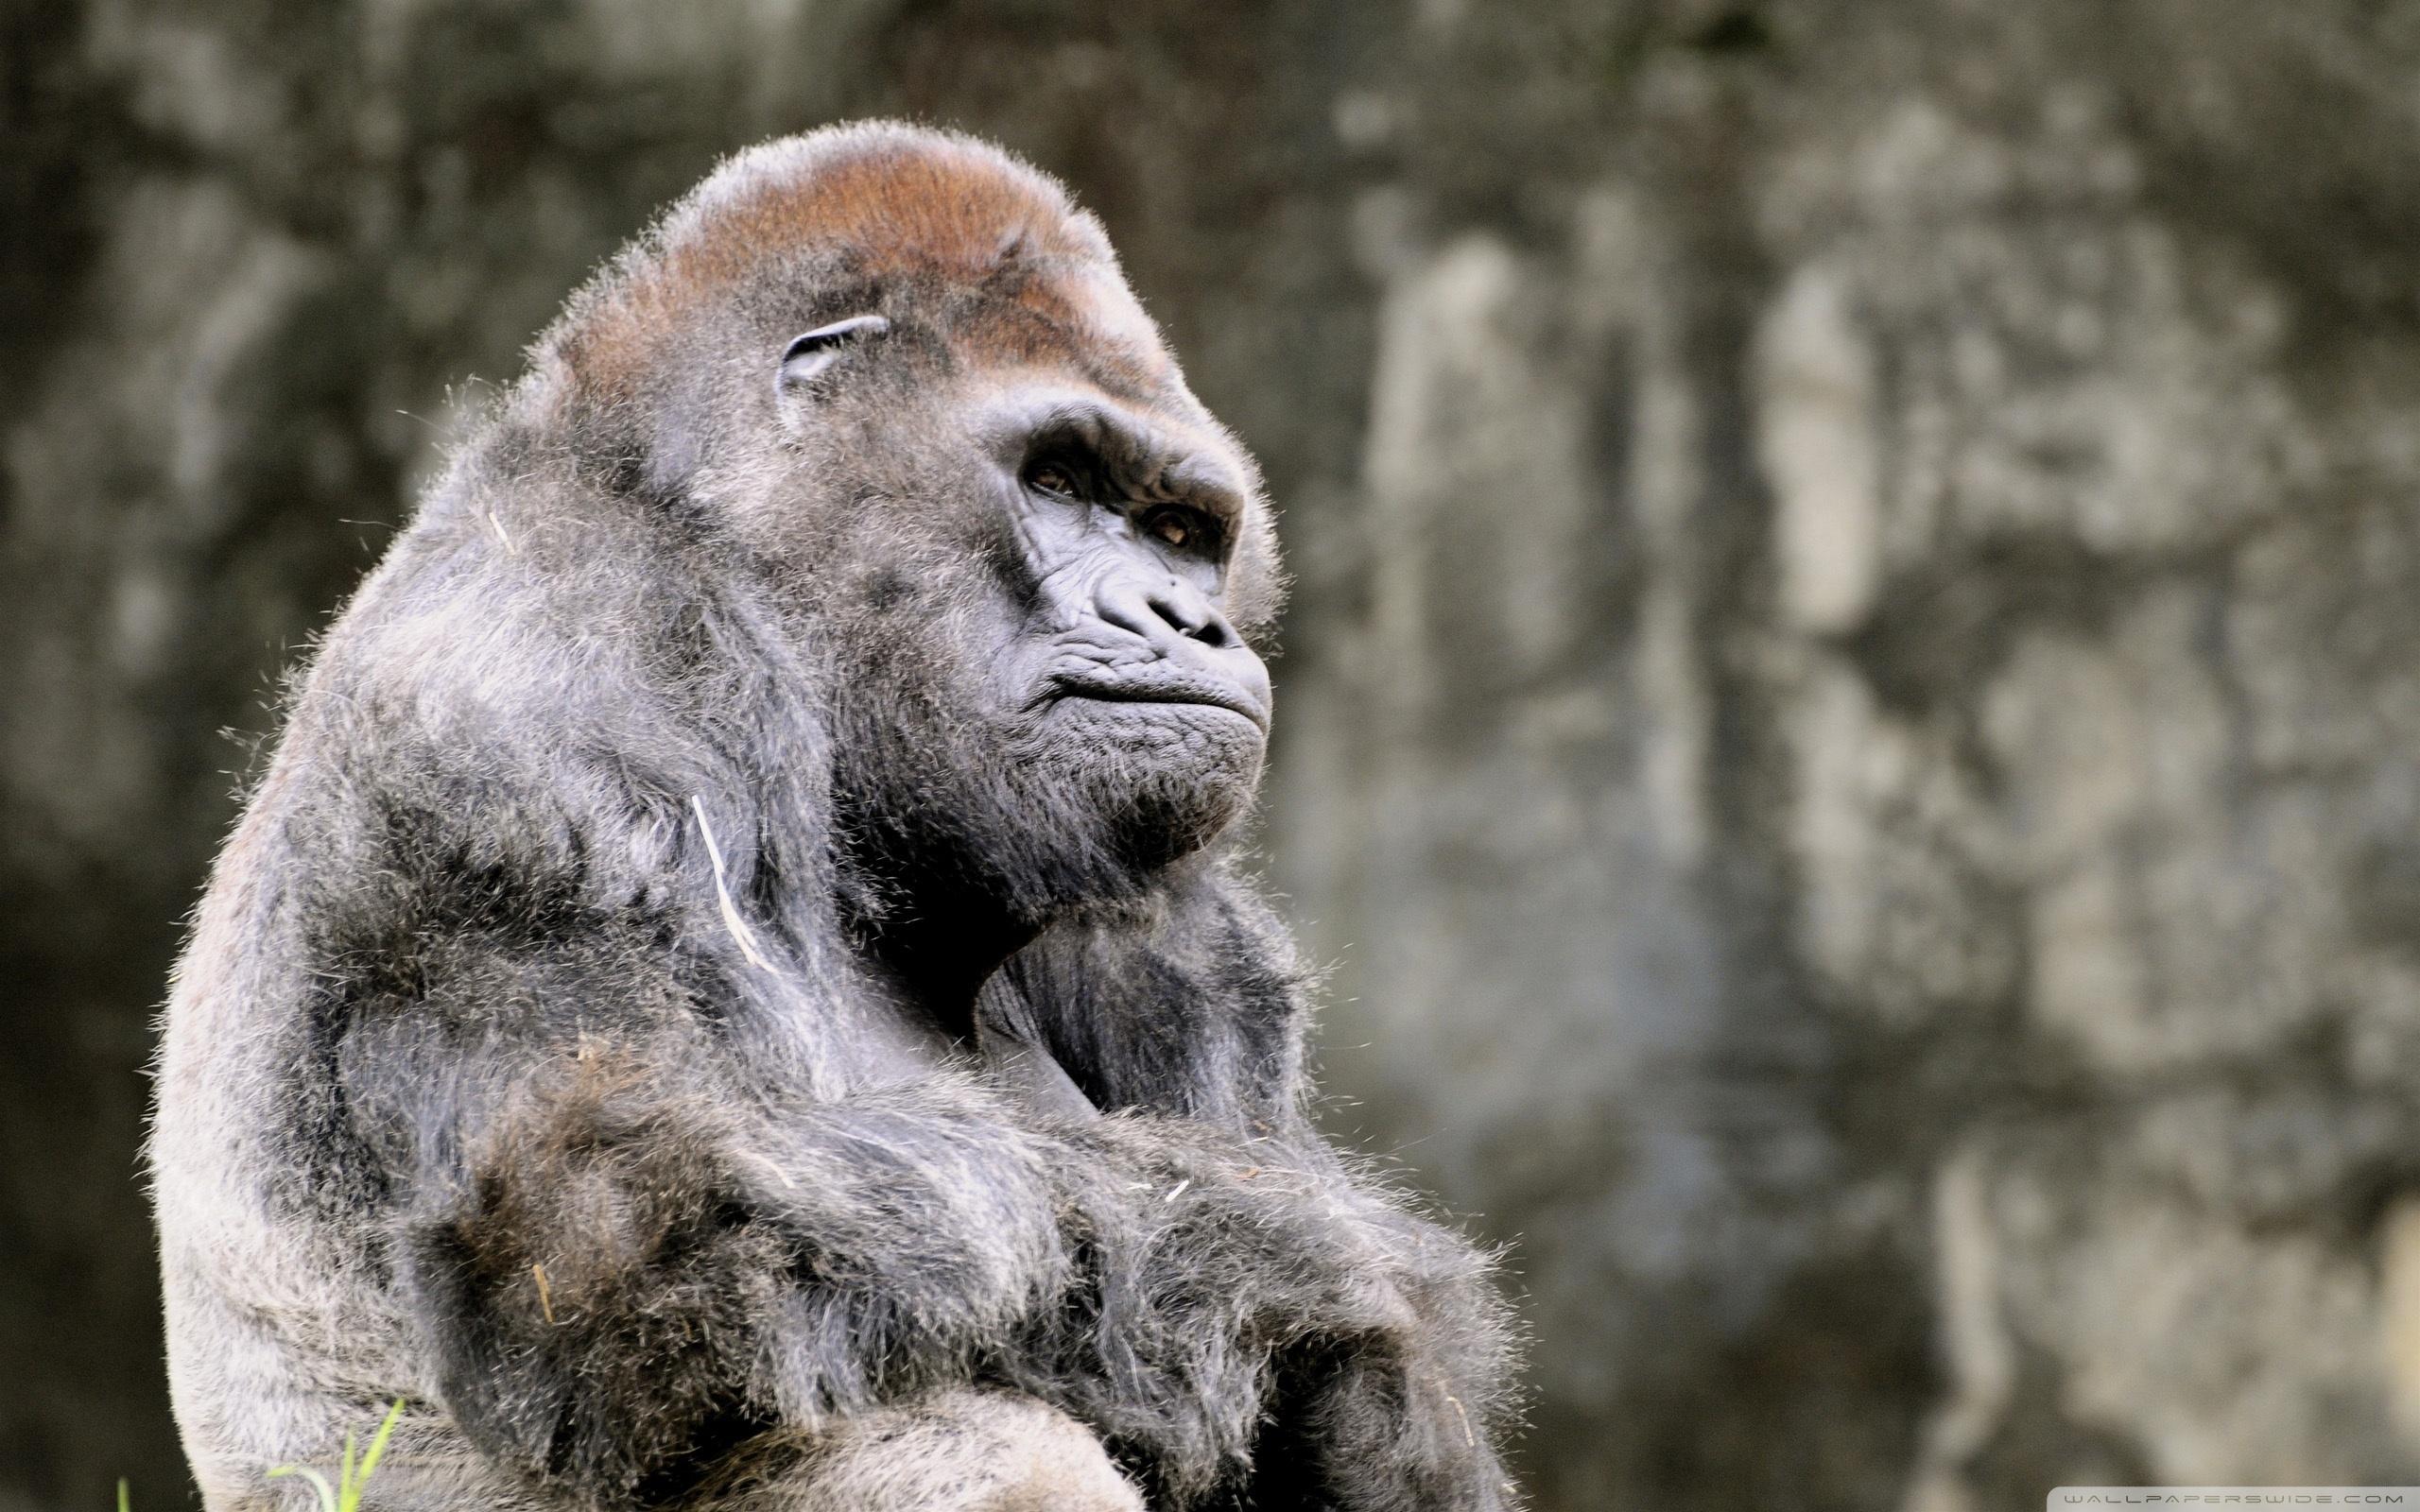 Download The Most Beautiful Thoughtful Gorilla Wallpapers